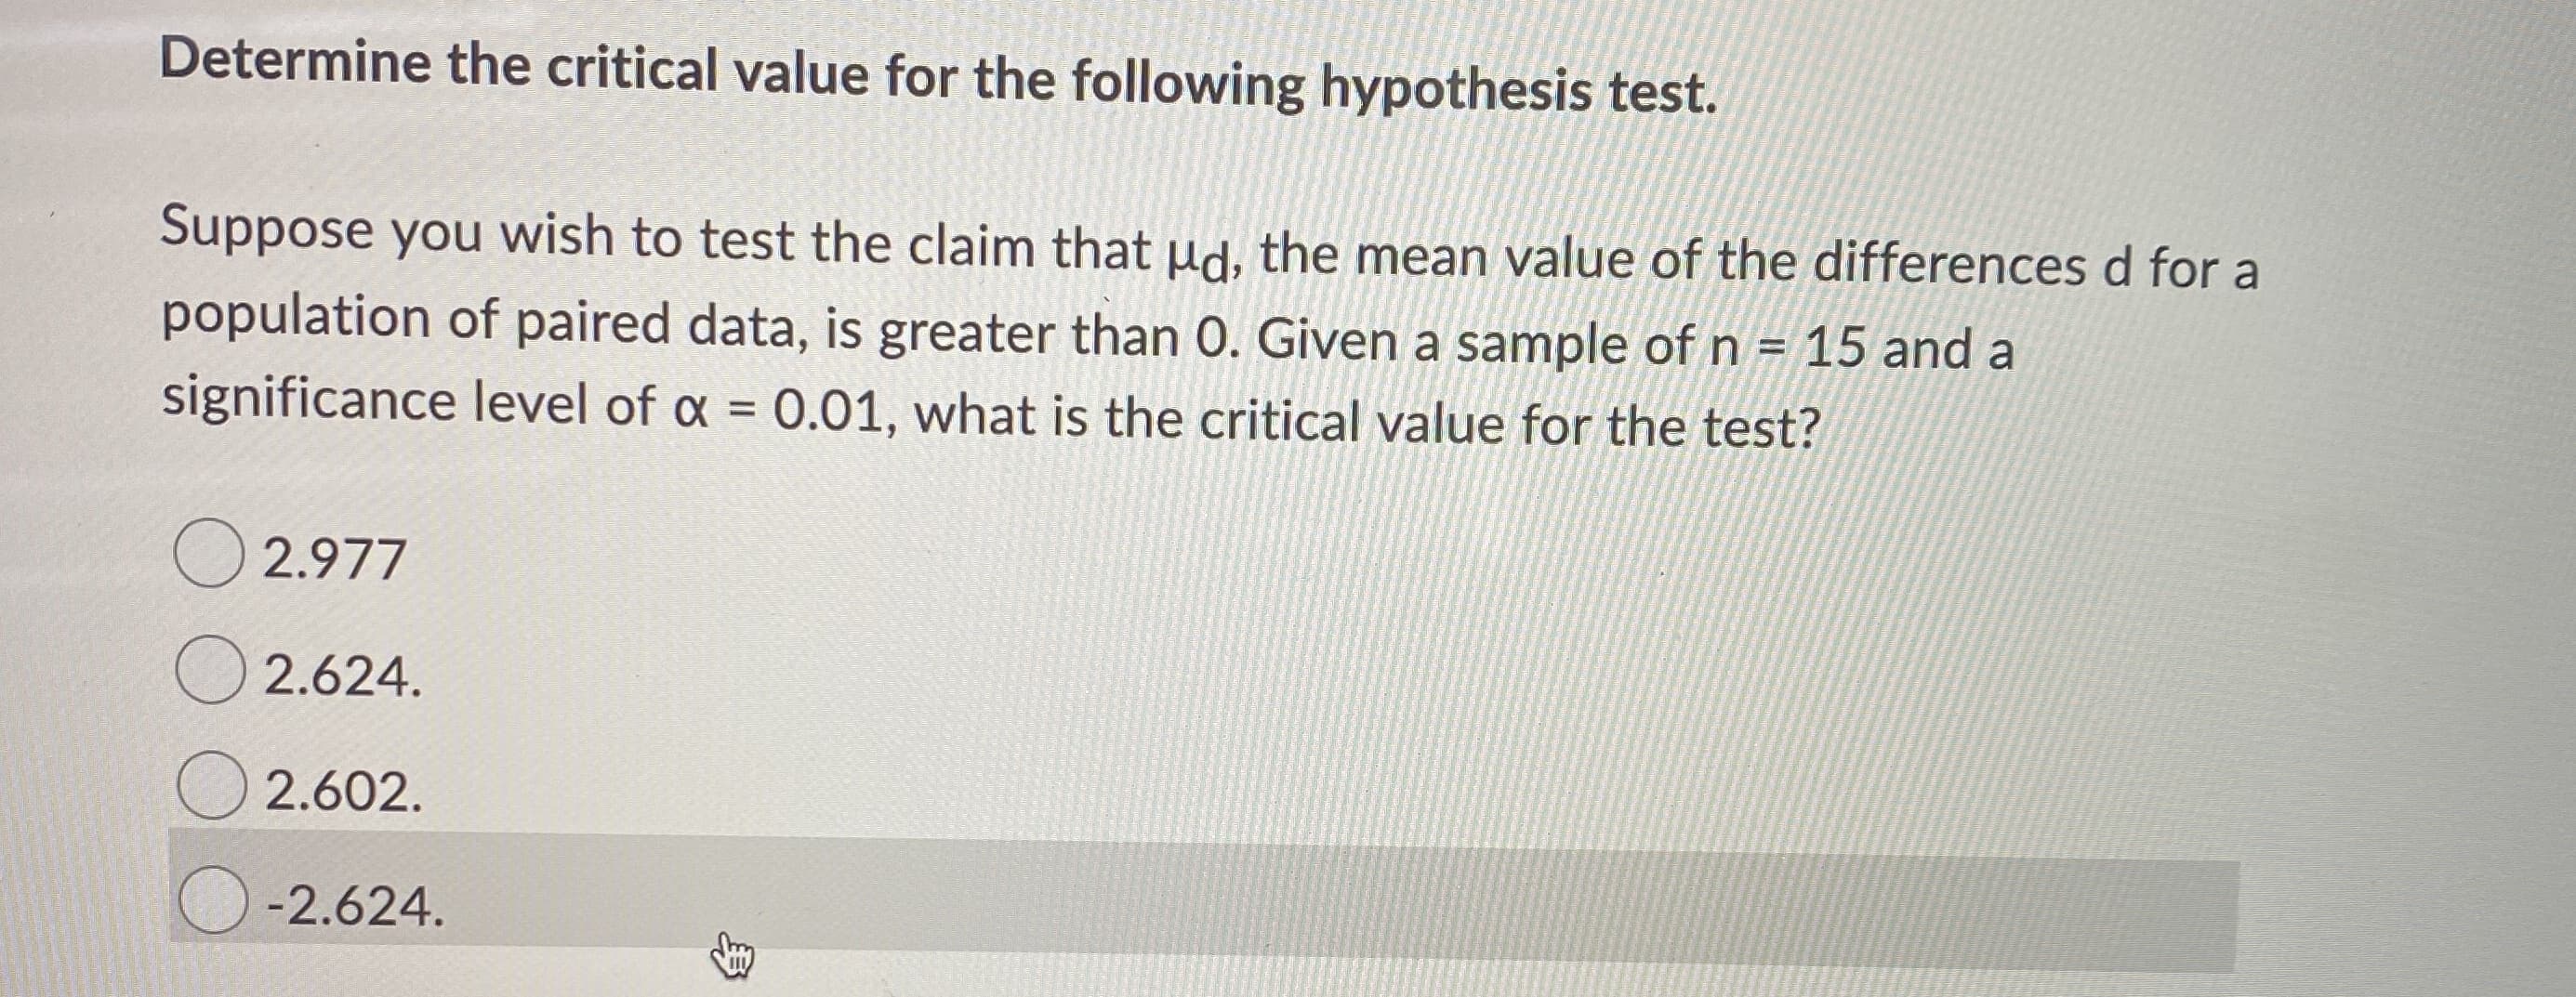 Suppose you wish to test the claim that Hd, the mean value of the differences d for a
population of paired data, is greater than 0. Given a sample of n = 15 and a
significance level of x = 0.01, what is the critical value for the test?
%3D
O 2.977
2.624.
2.602.
-2.624.
